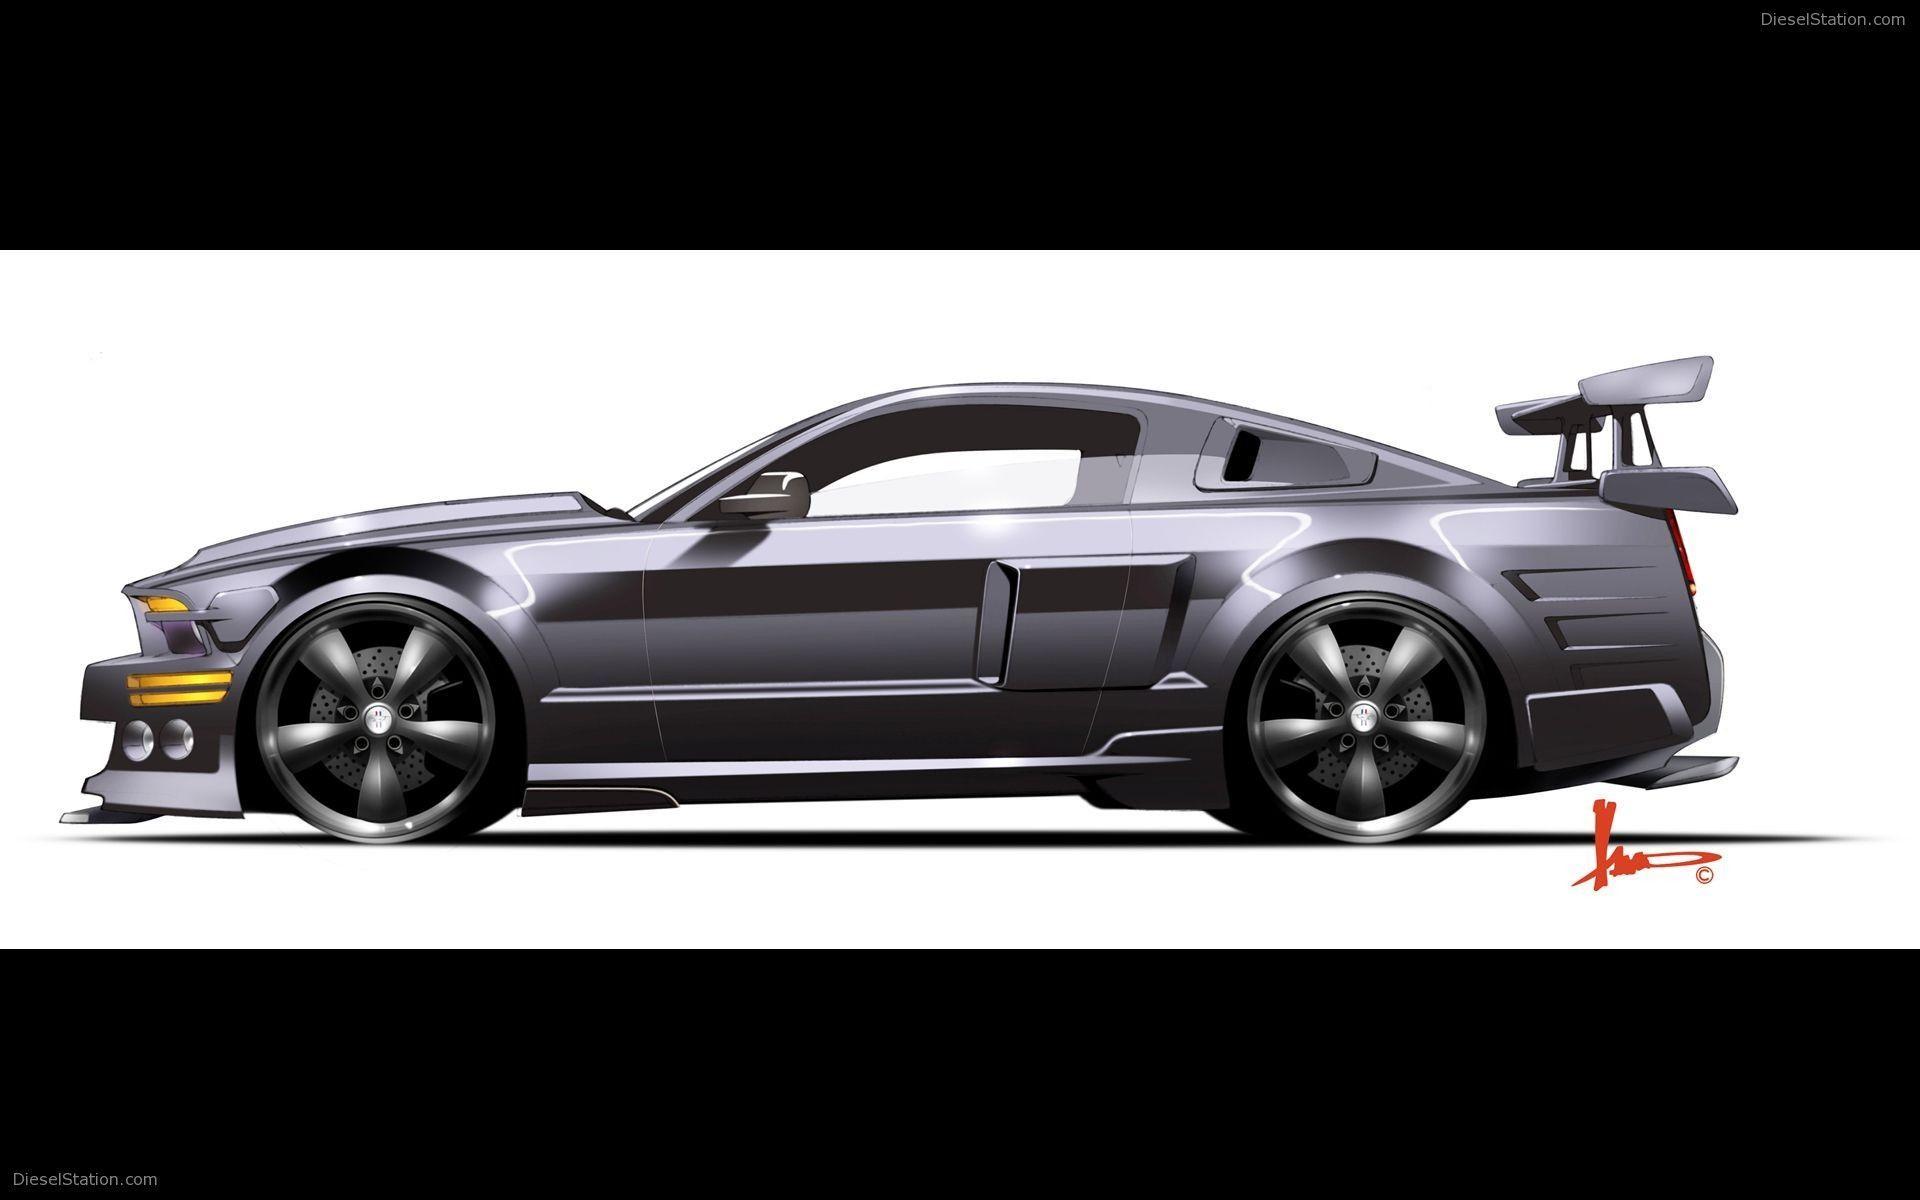 Knight Rider Shelby Mustang GT500KR Widescreen Exotic Car Picture